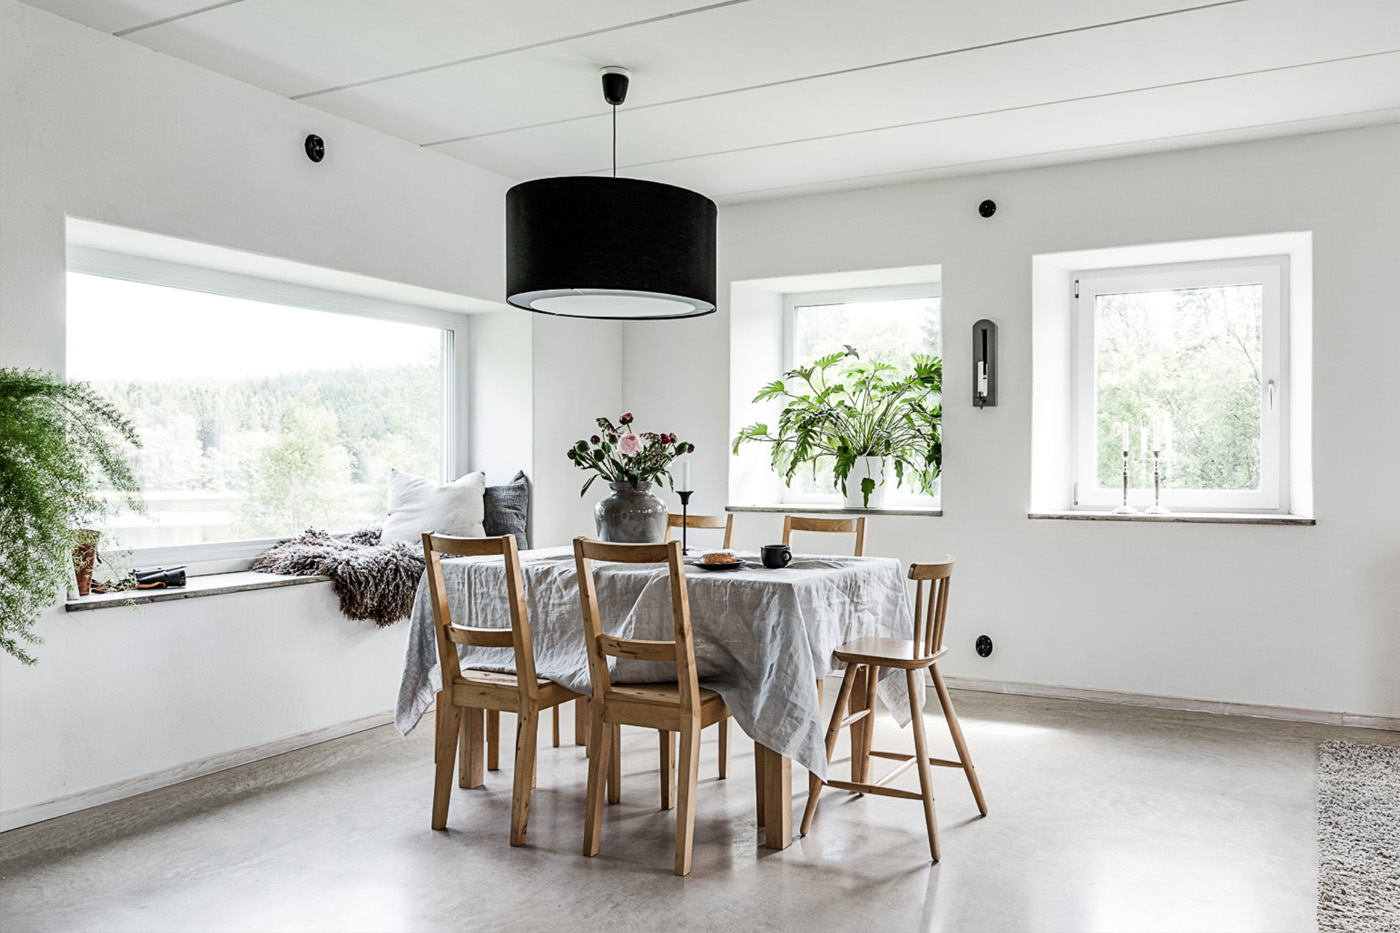 An unconventional Swedish home